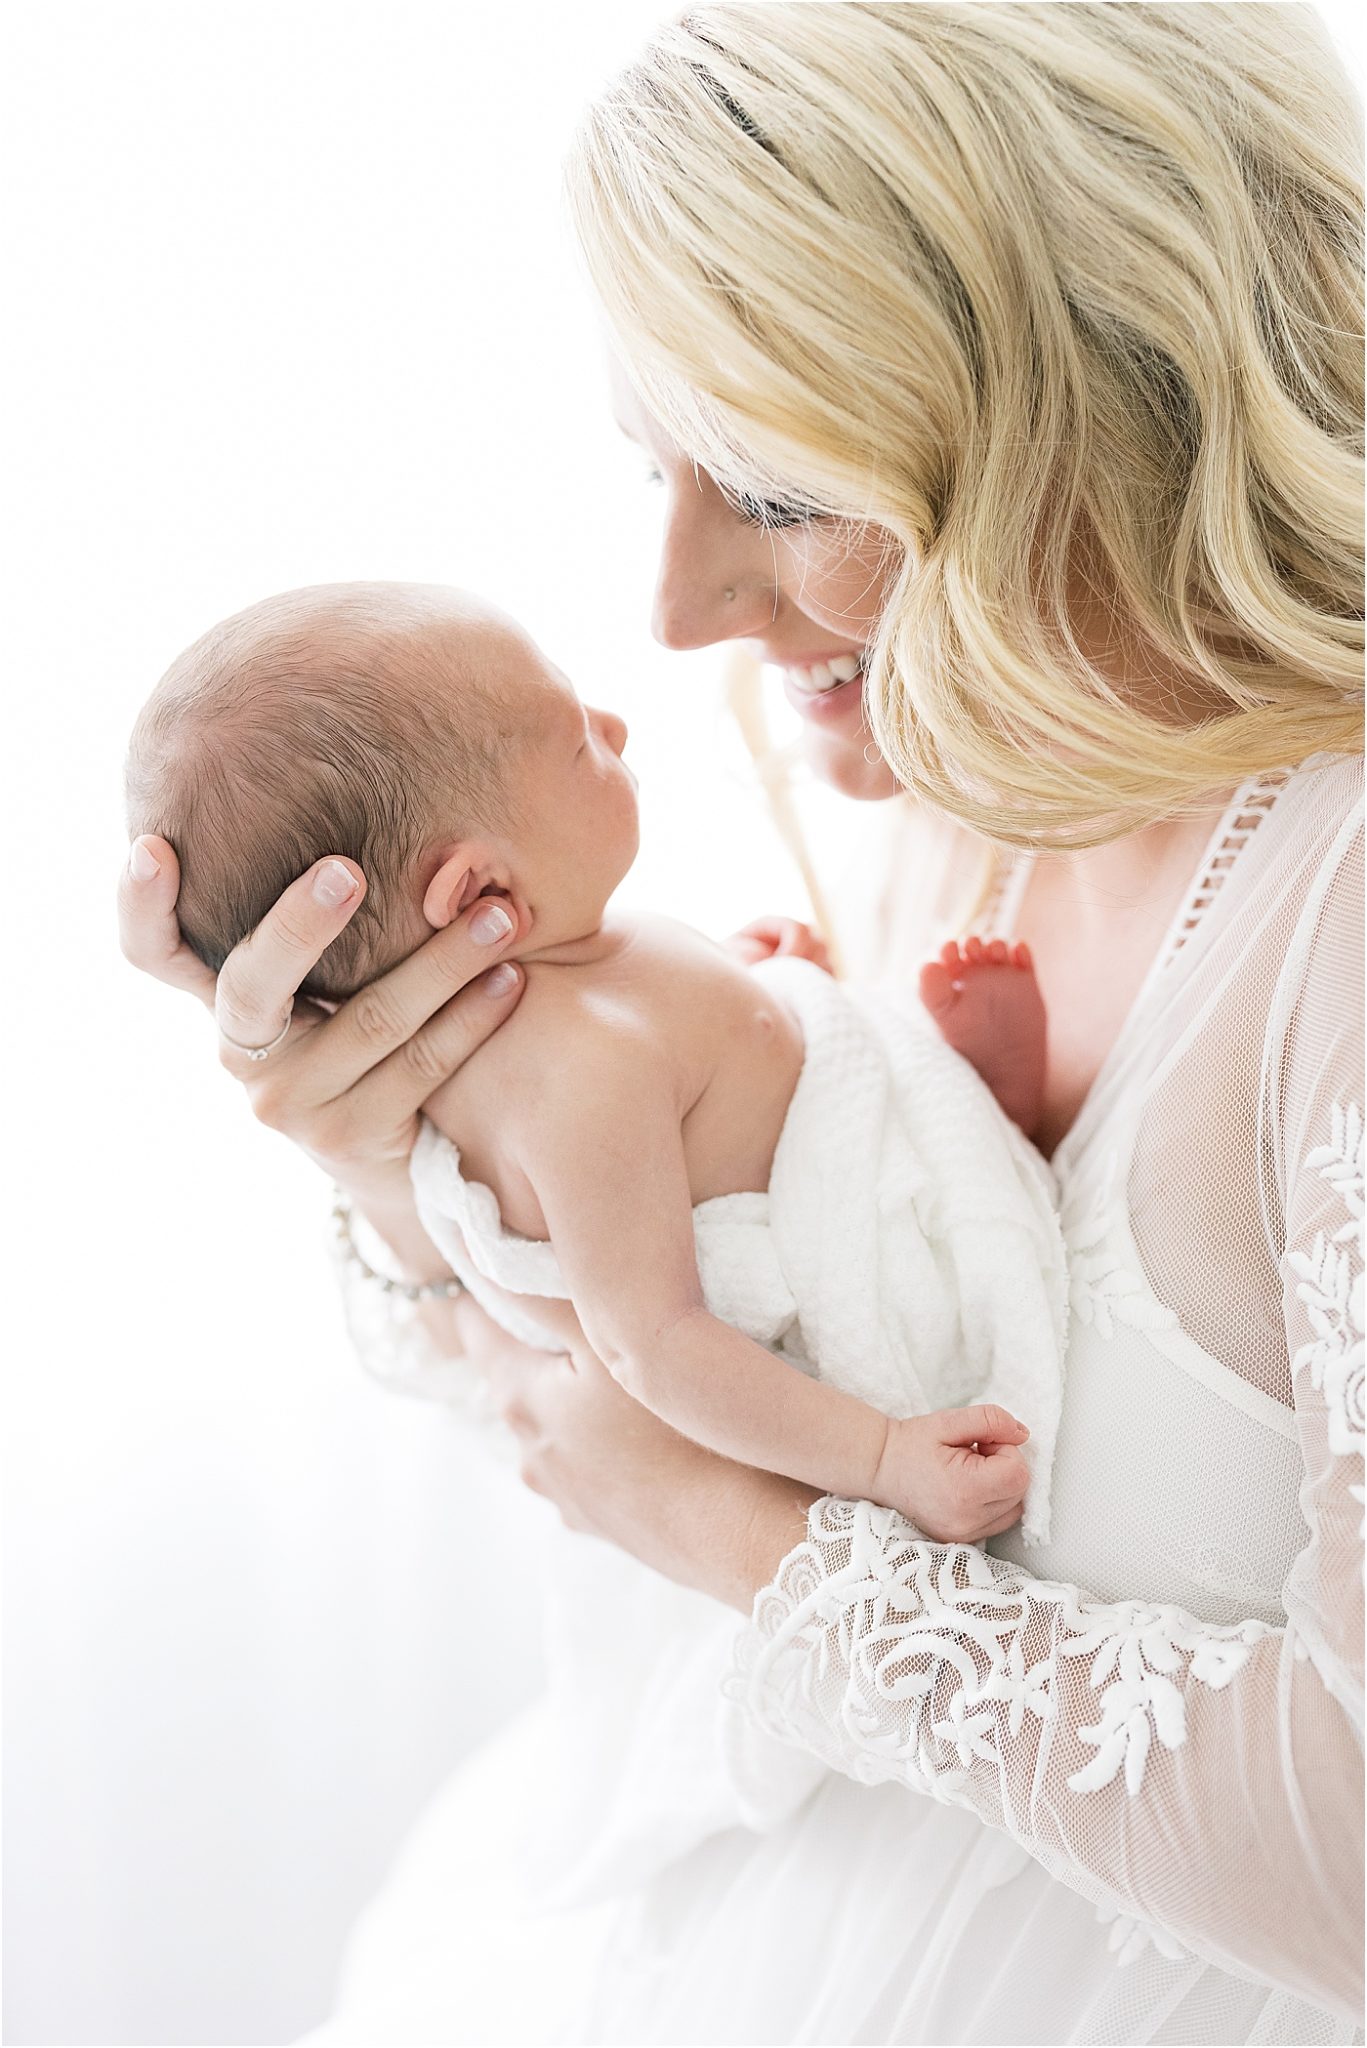 Mom holding baby boy for newborn photos in Indianapolis newborn studio. Photo by Lindsay Konopa Photography.